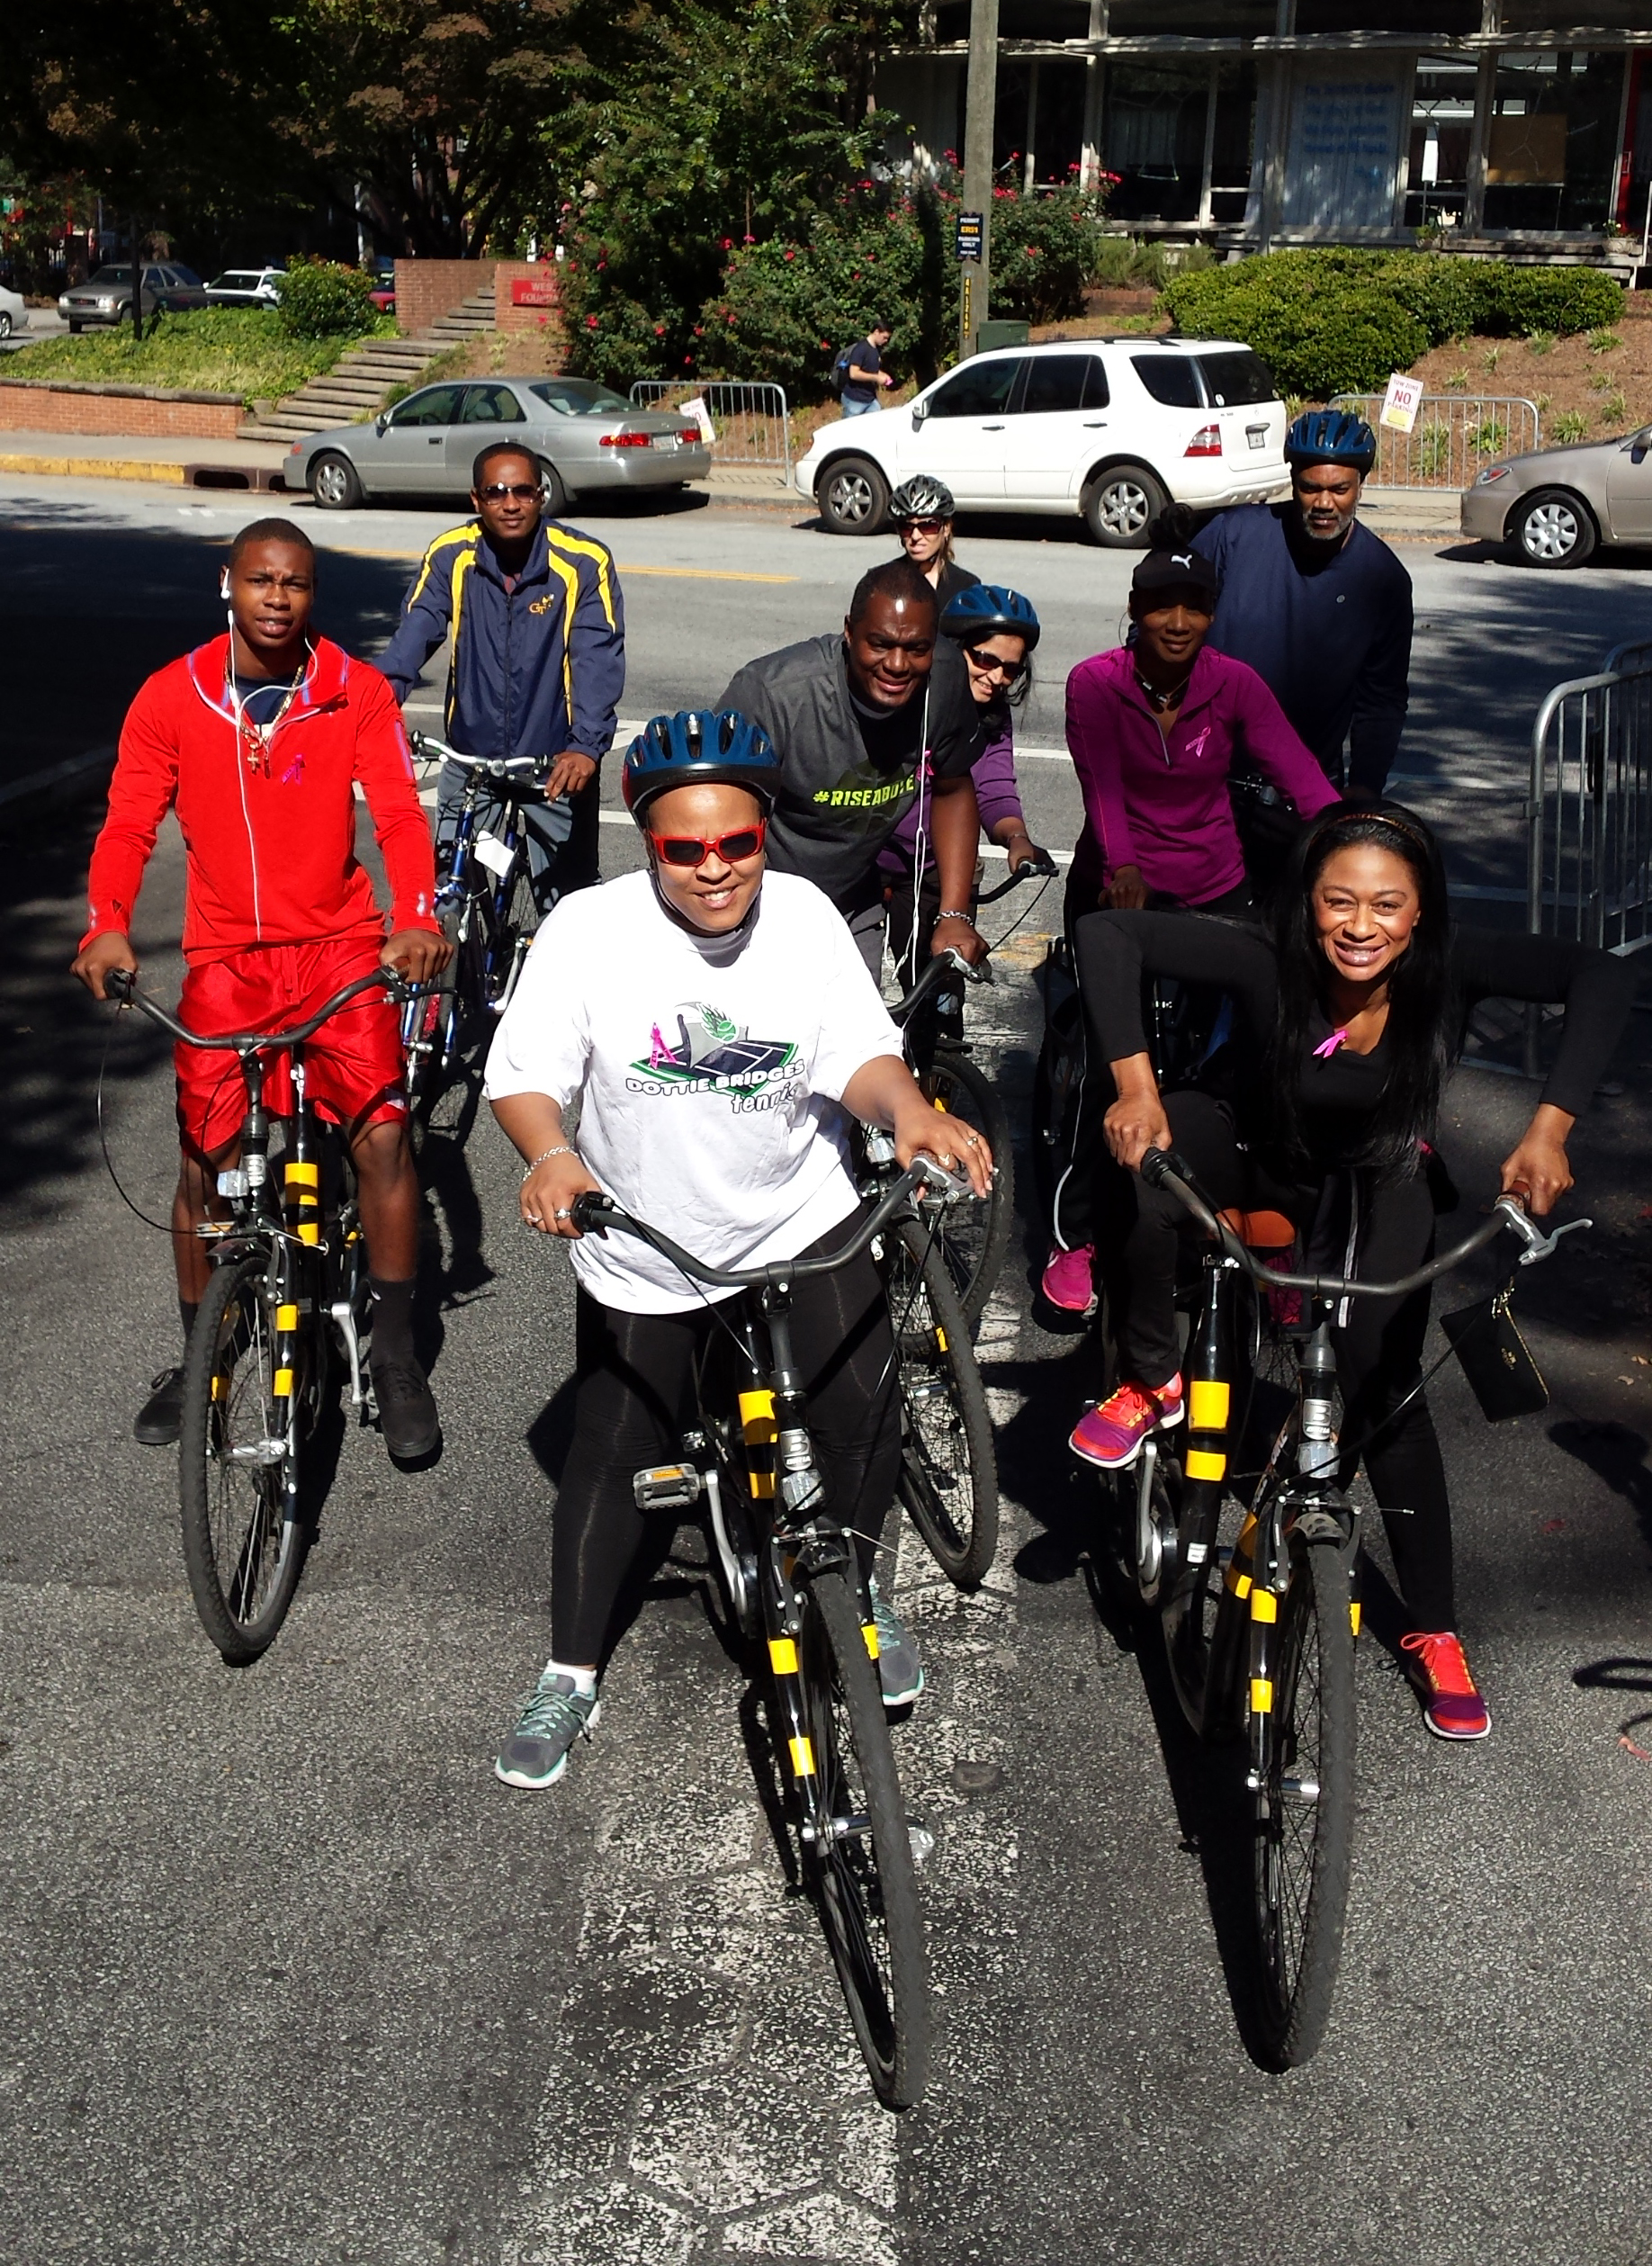 Employeees from Parking and Transportation Services used the Atlanta Bike Challenge as an opportunity to take group rides around campus and Midtown.